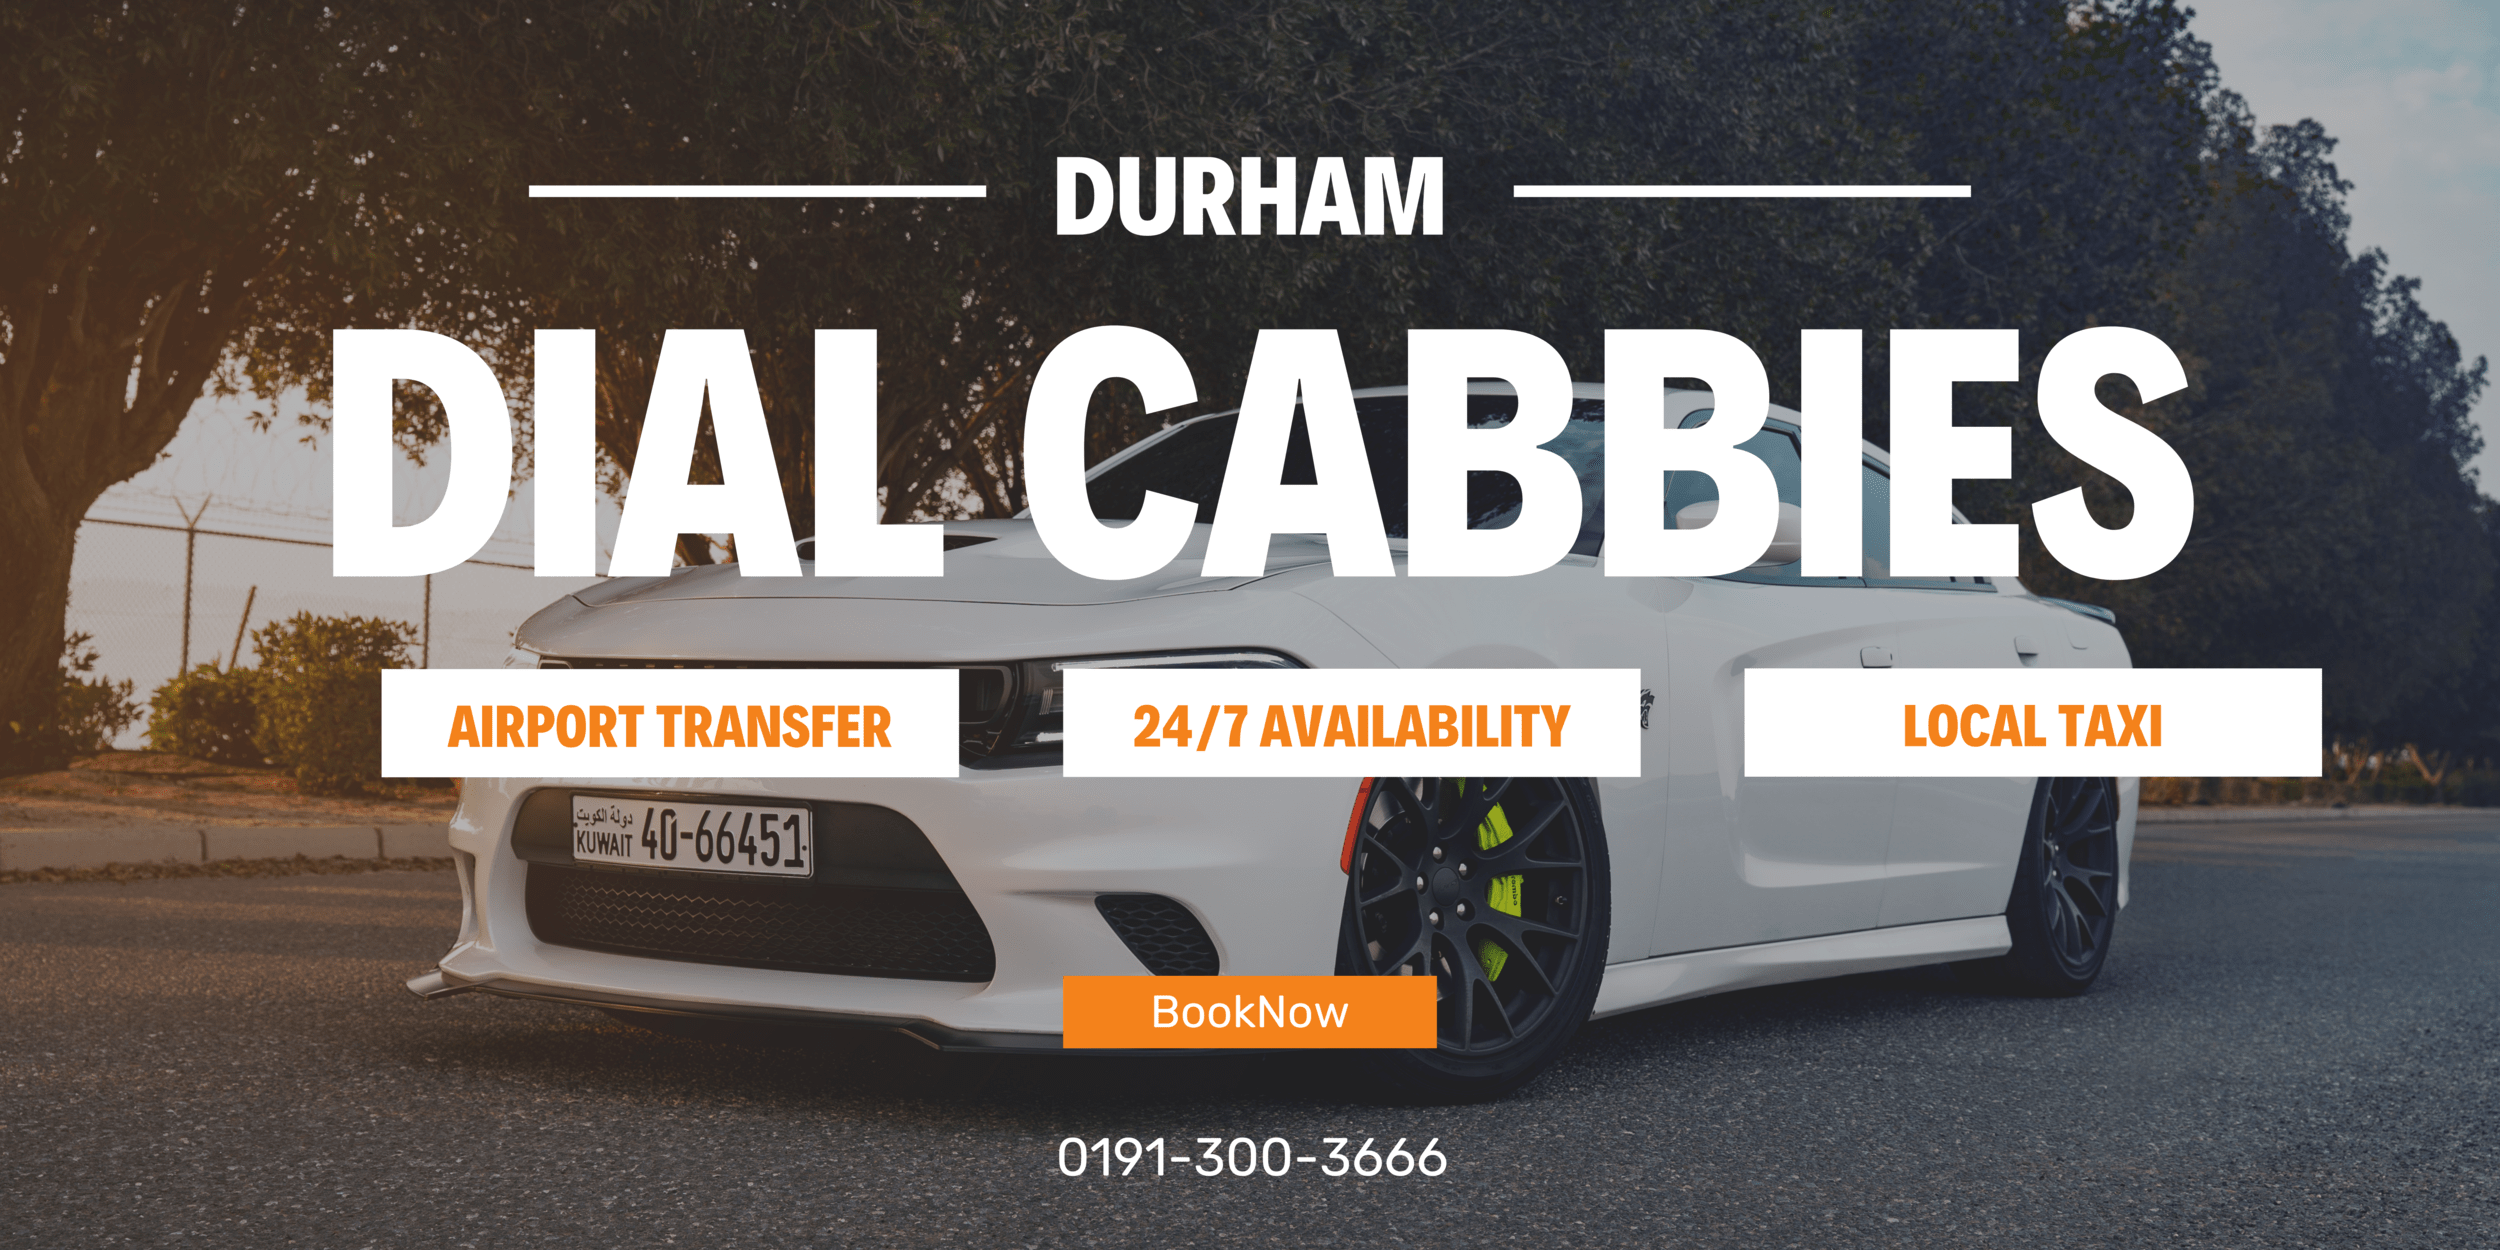 dial cabbies - durham taxi company